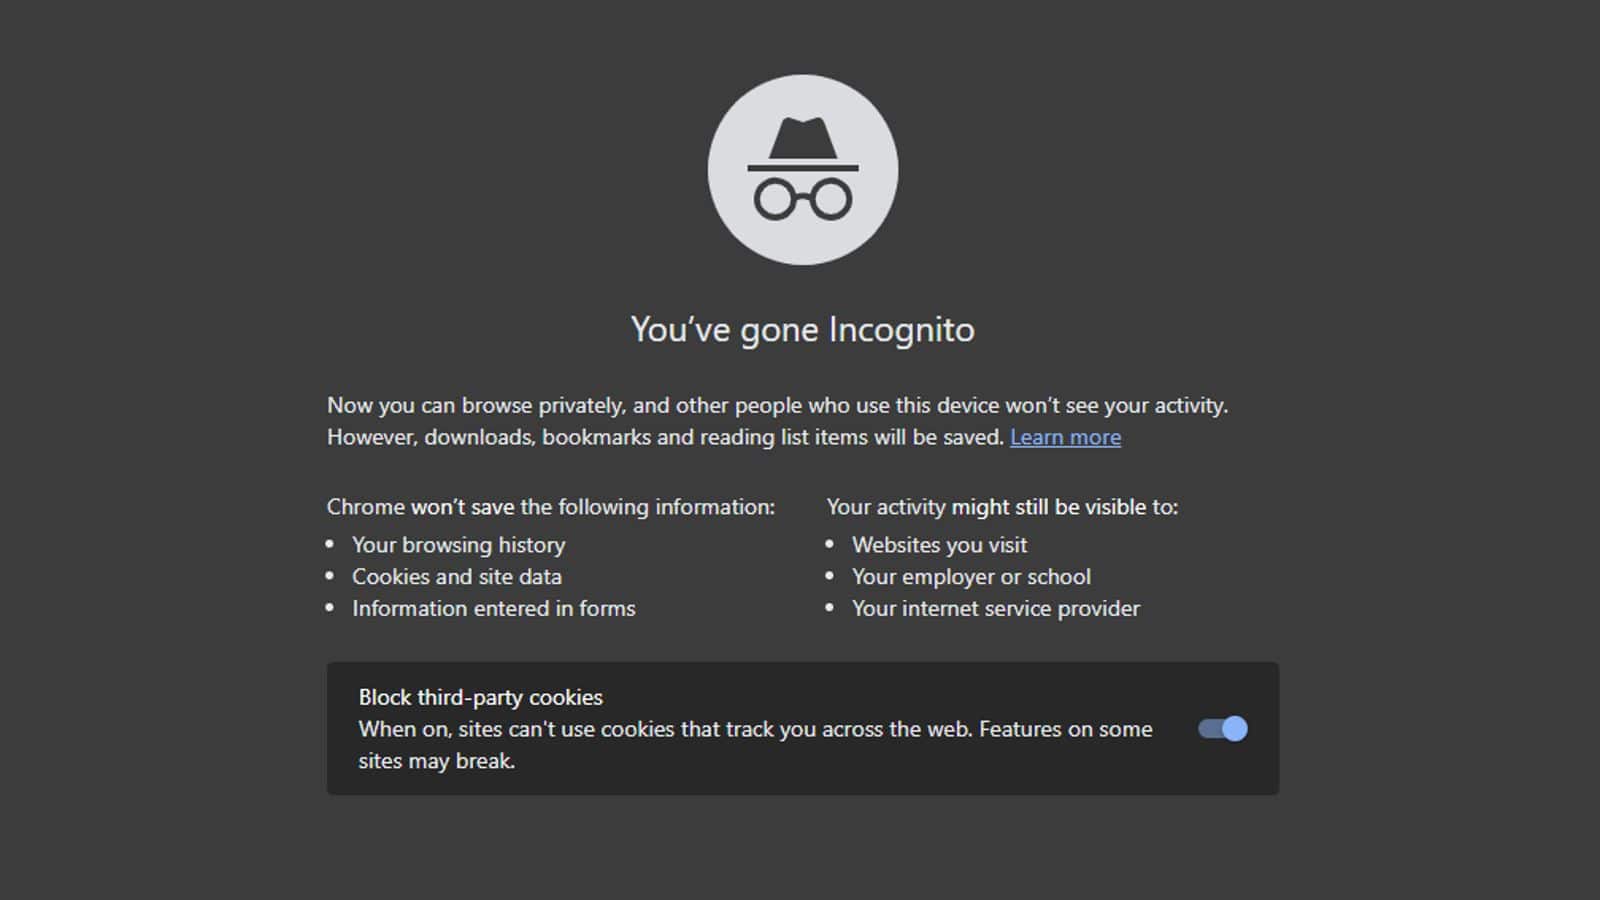 Google to erase user data of millions using 'Incognito' mode